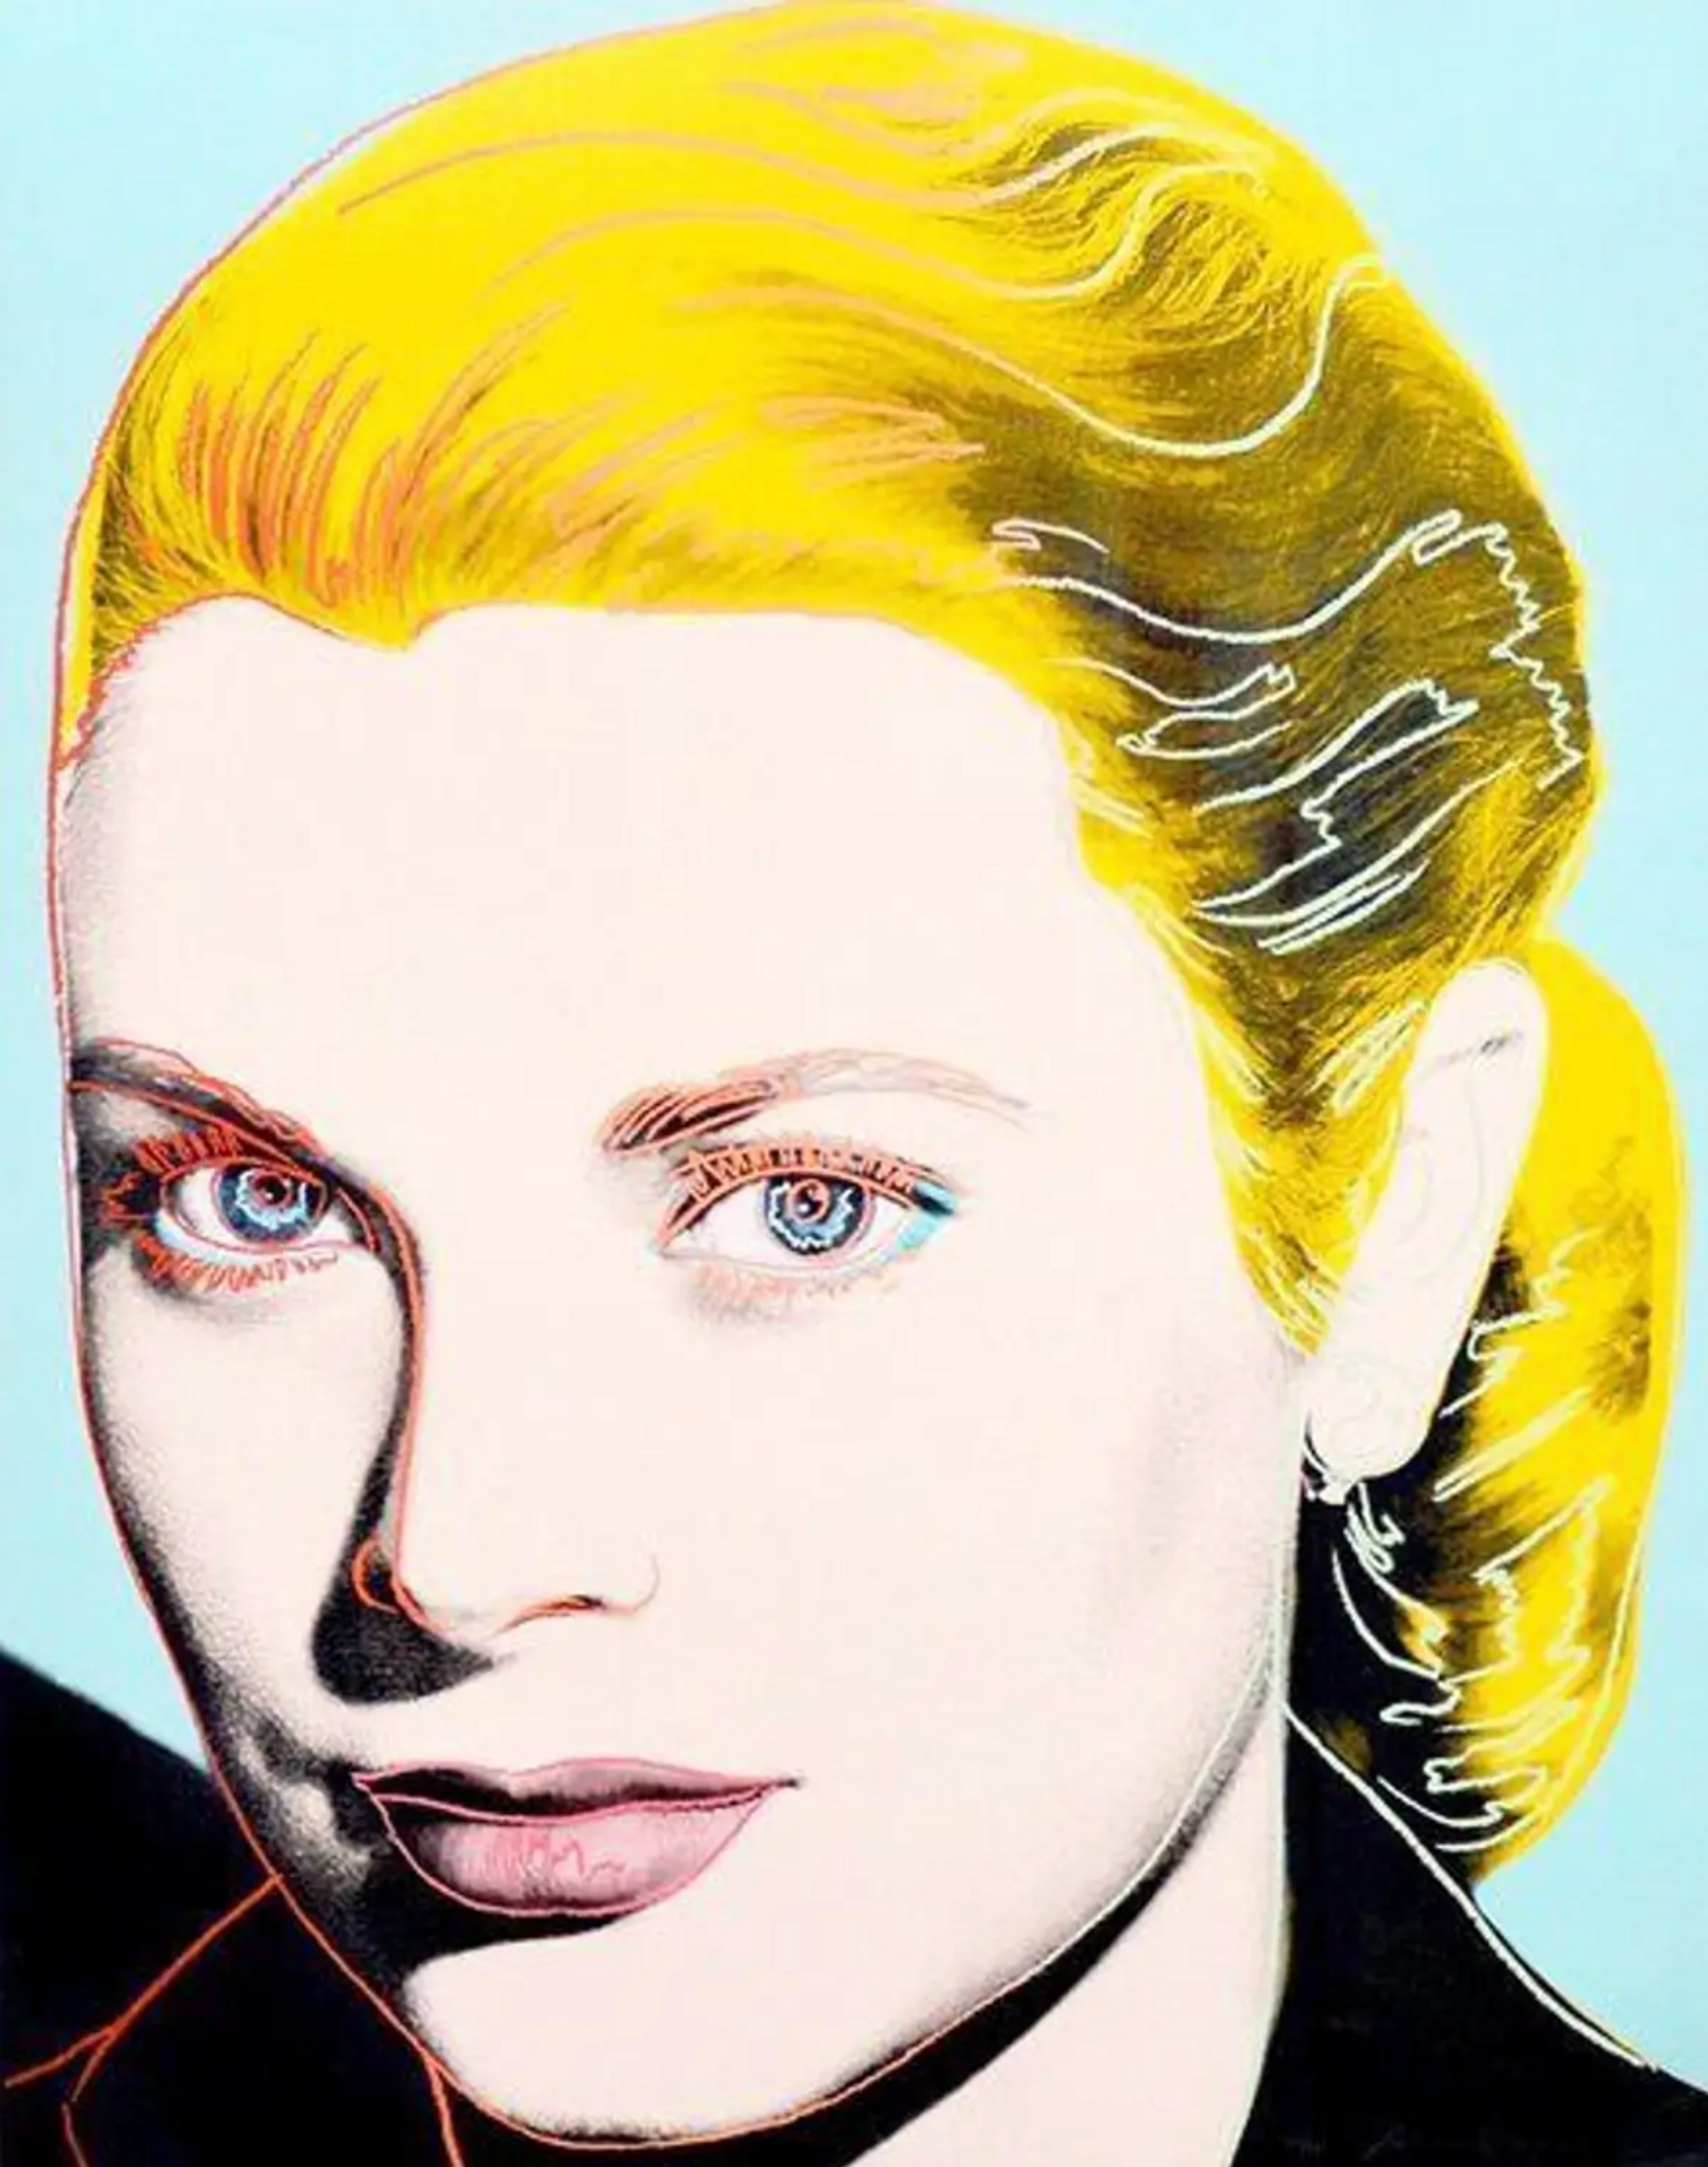 A Buyer’s Guide To Andy Warhol